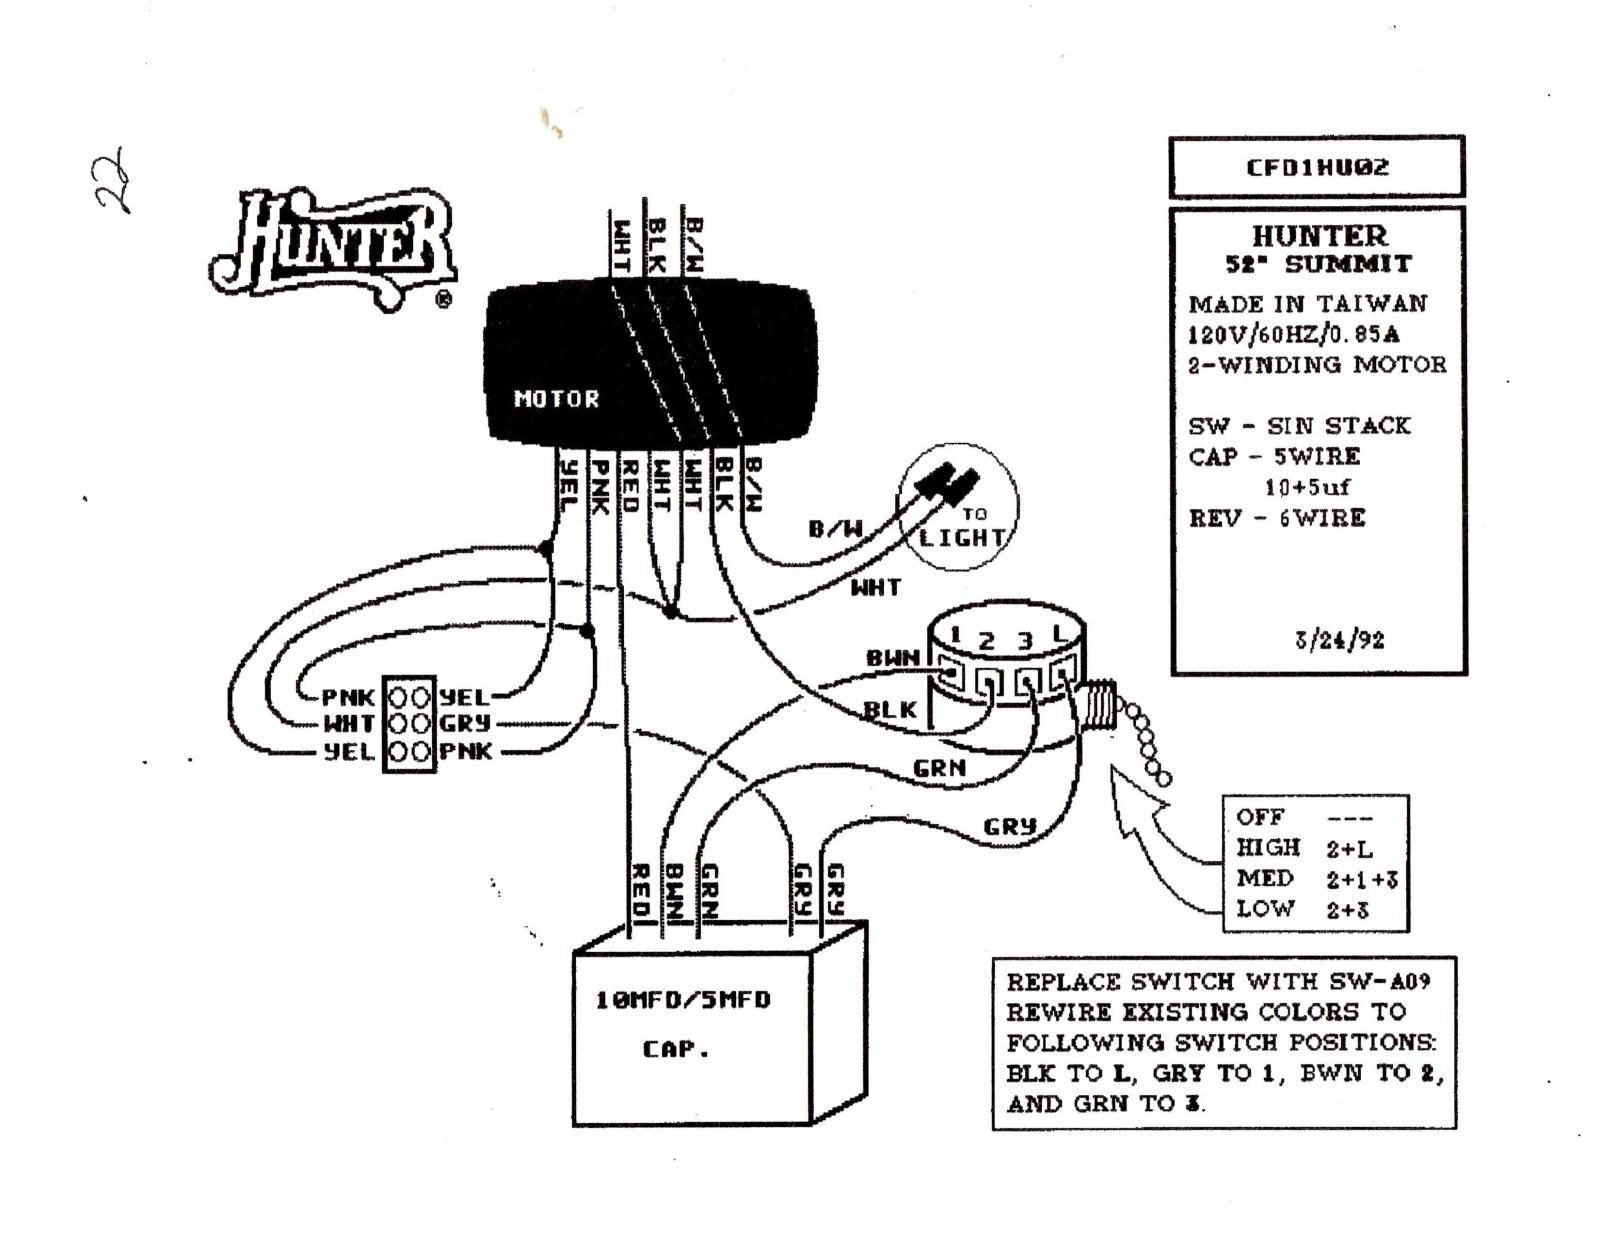 Harbor Breexe Wiring Diagram Fan And Light | Manual E-Books - Harbor Breeze Fan Wiring Diagram